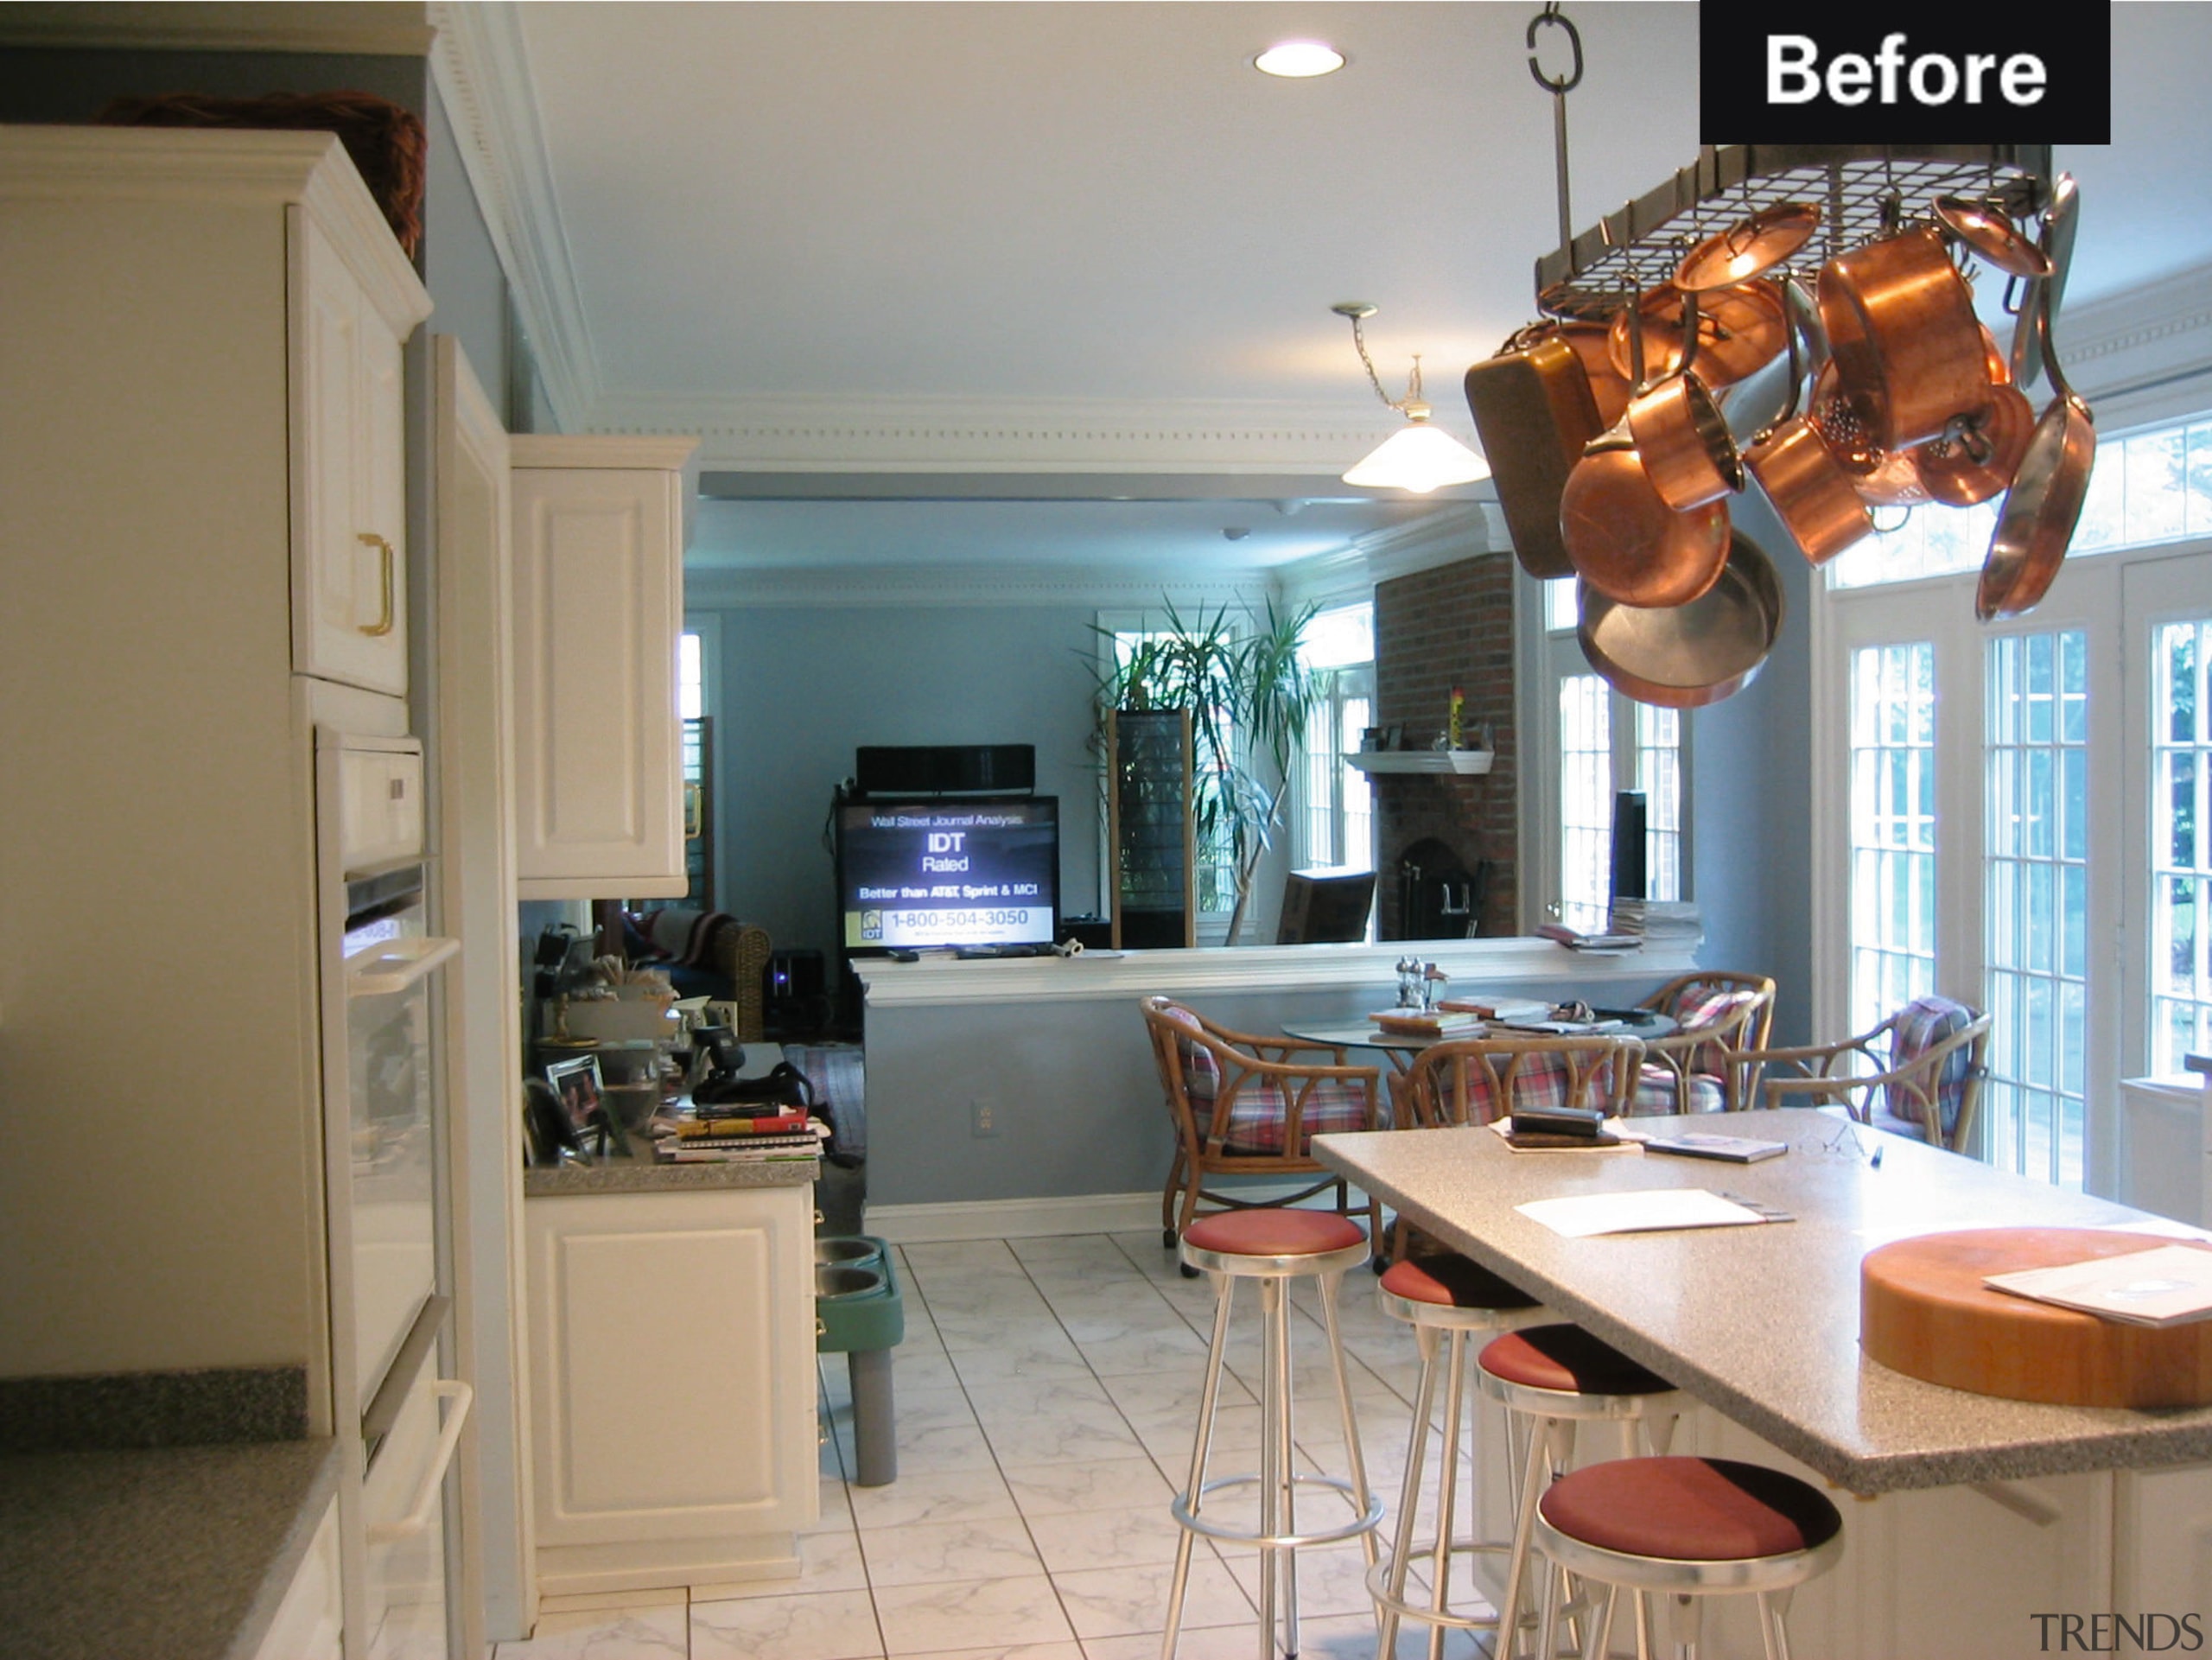 View of the kitchen area before it was cabinetry, countertop, home, interior design, kitchen, real estate, room, gray